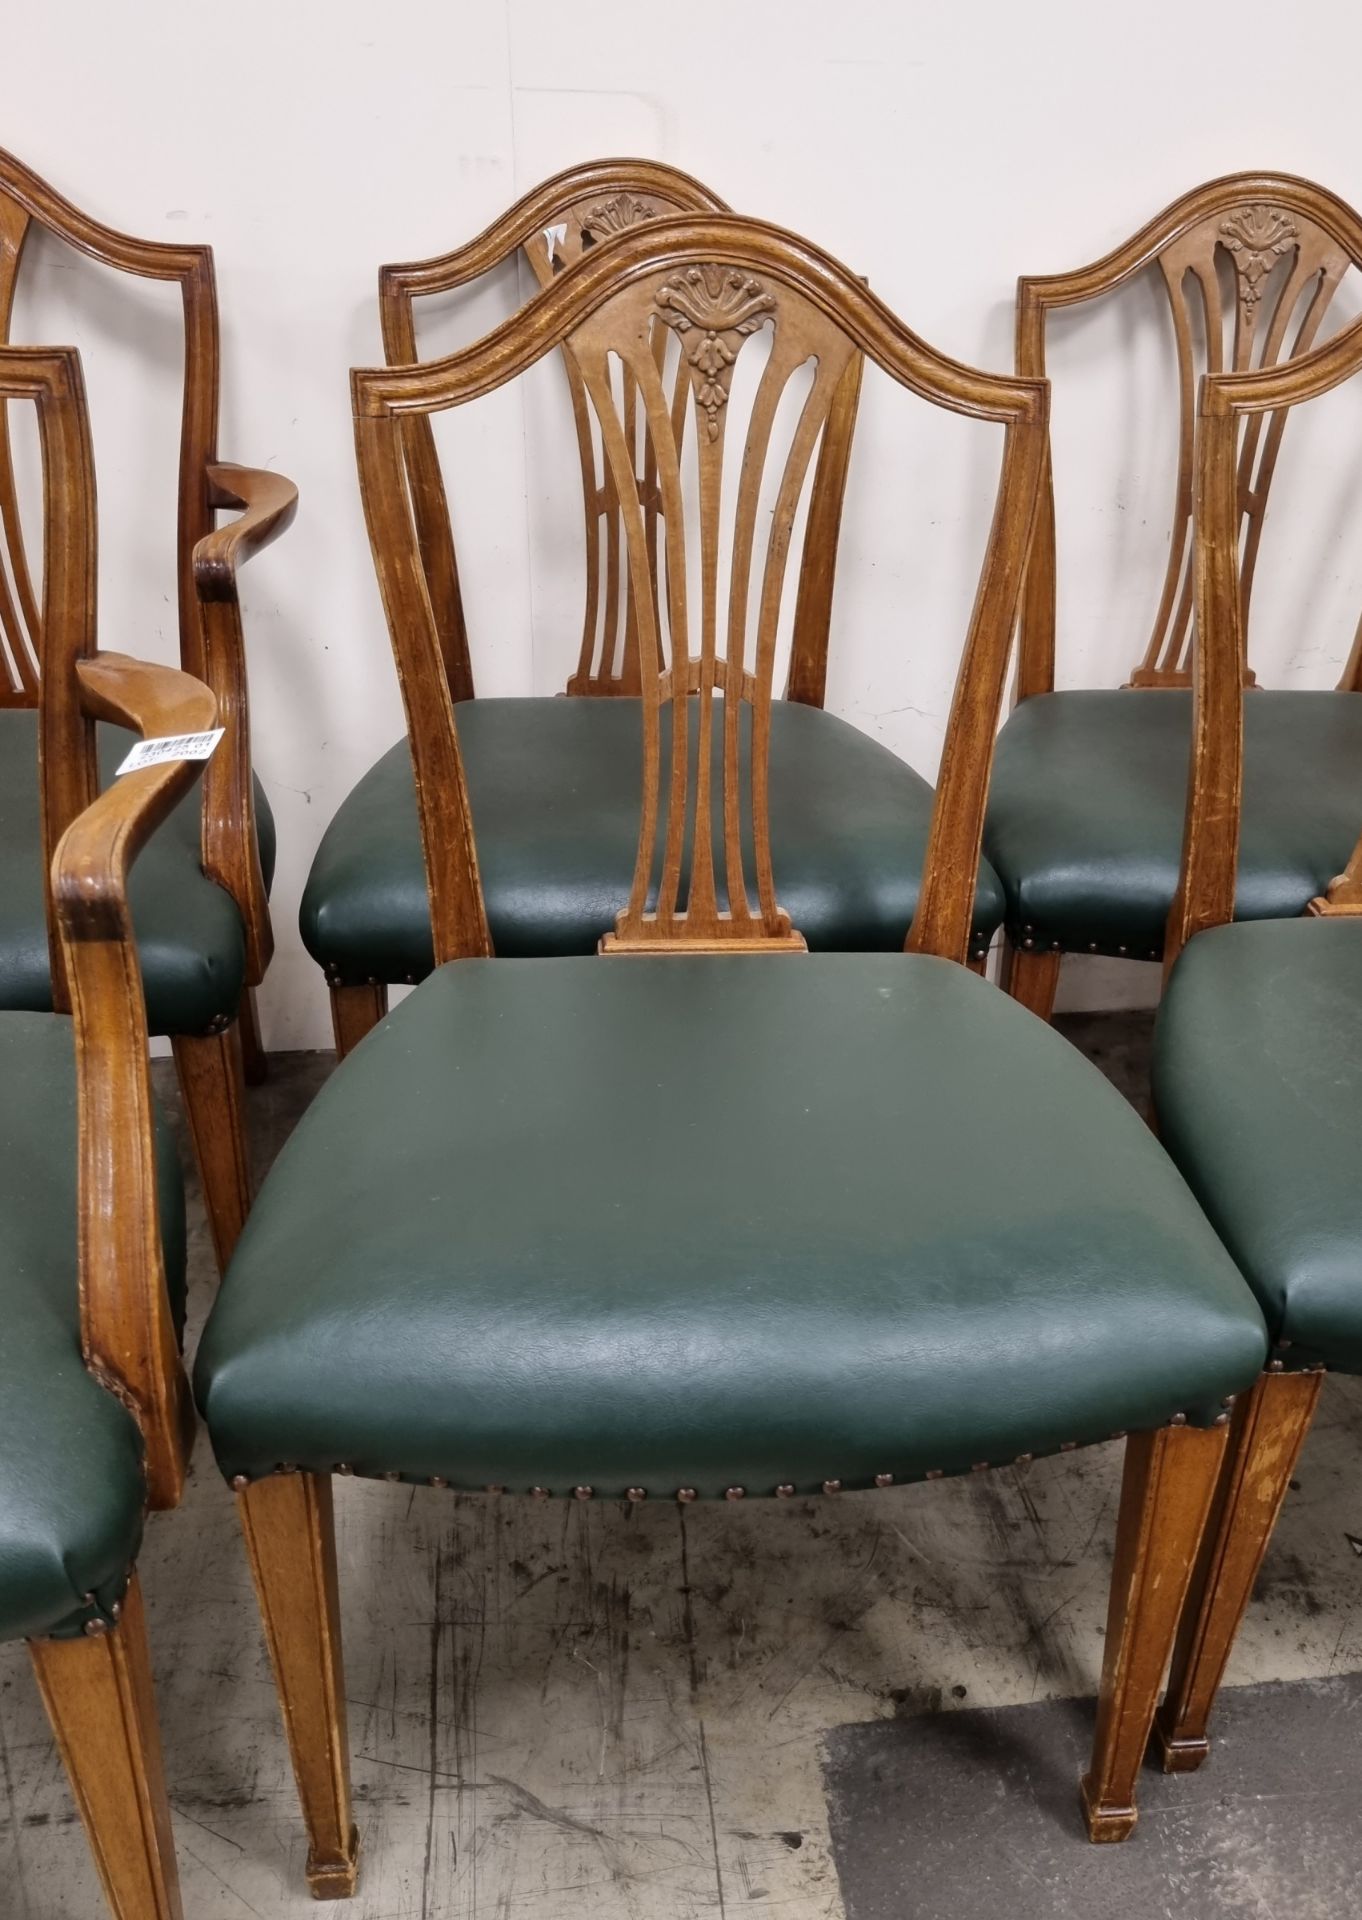 14x 1970 - 1980's Wooden chairs - Image 6 of 10